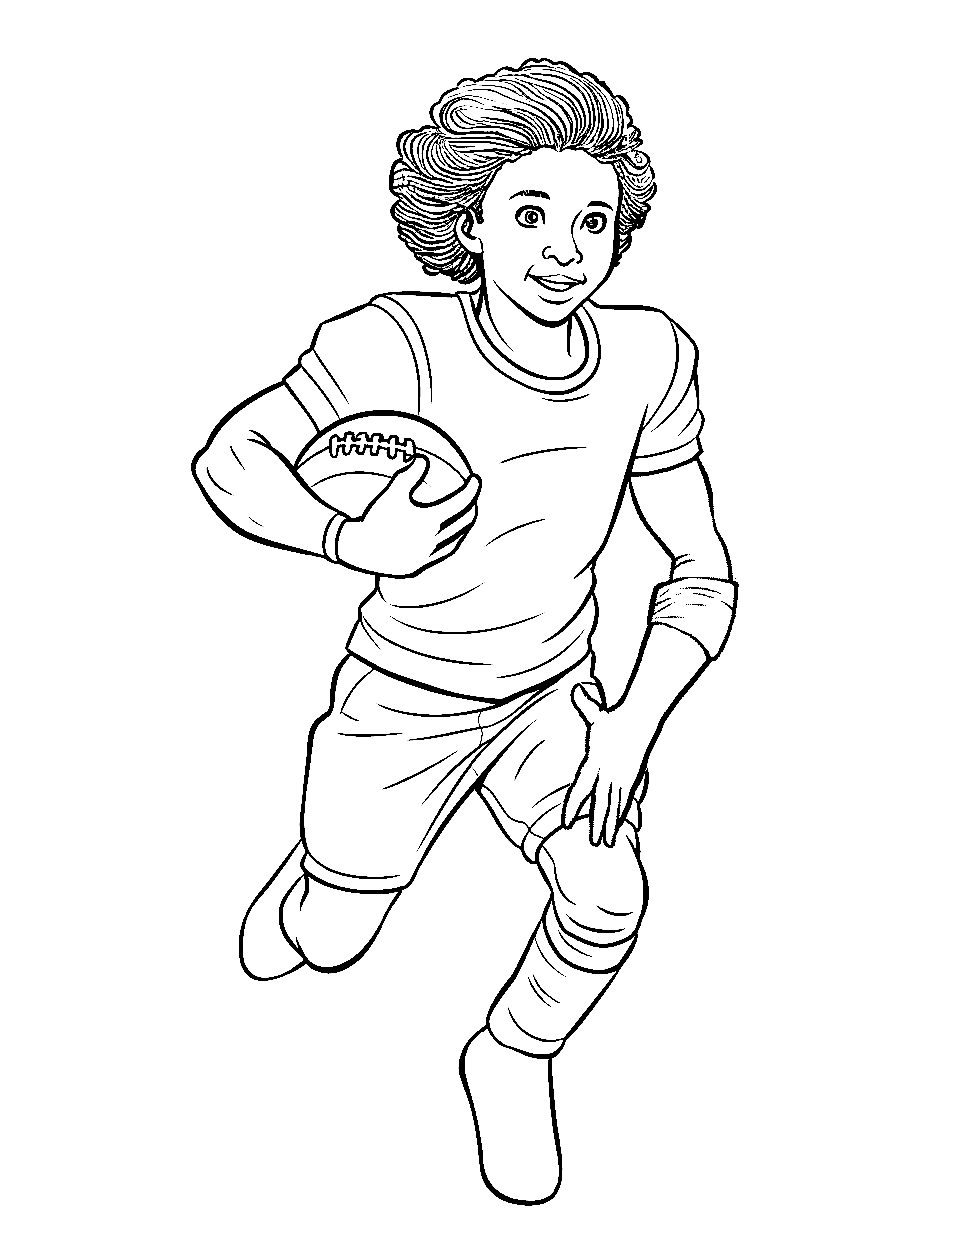 Rushing to the Field Coloring Page - A player without any gear rushing to the field to join the victory parade.